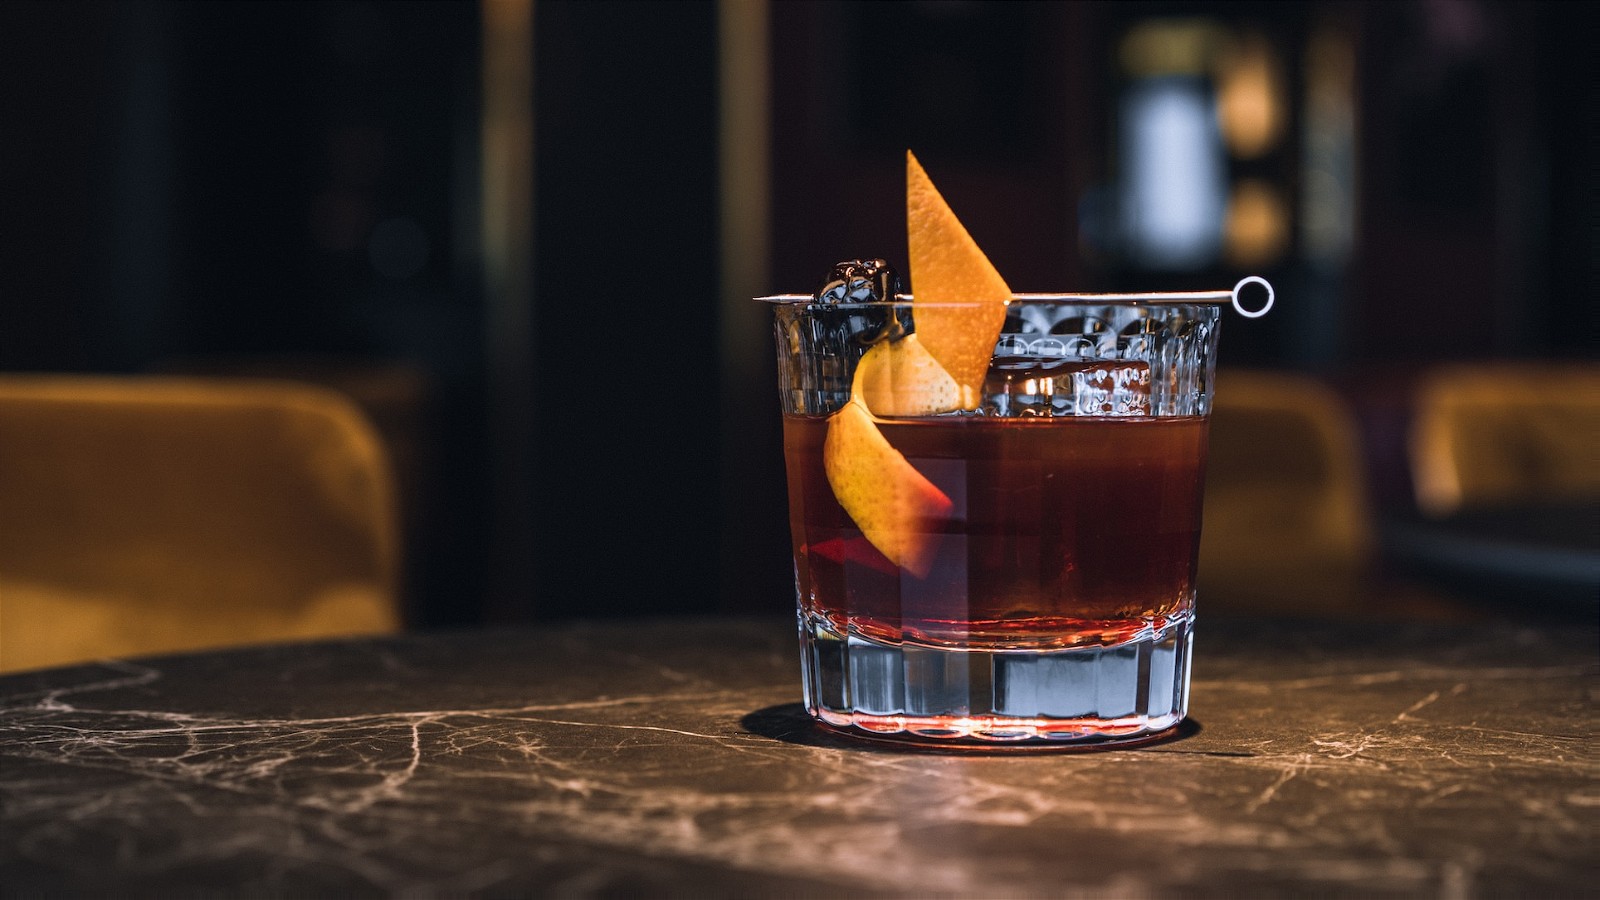 classic old fashioned cocktail